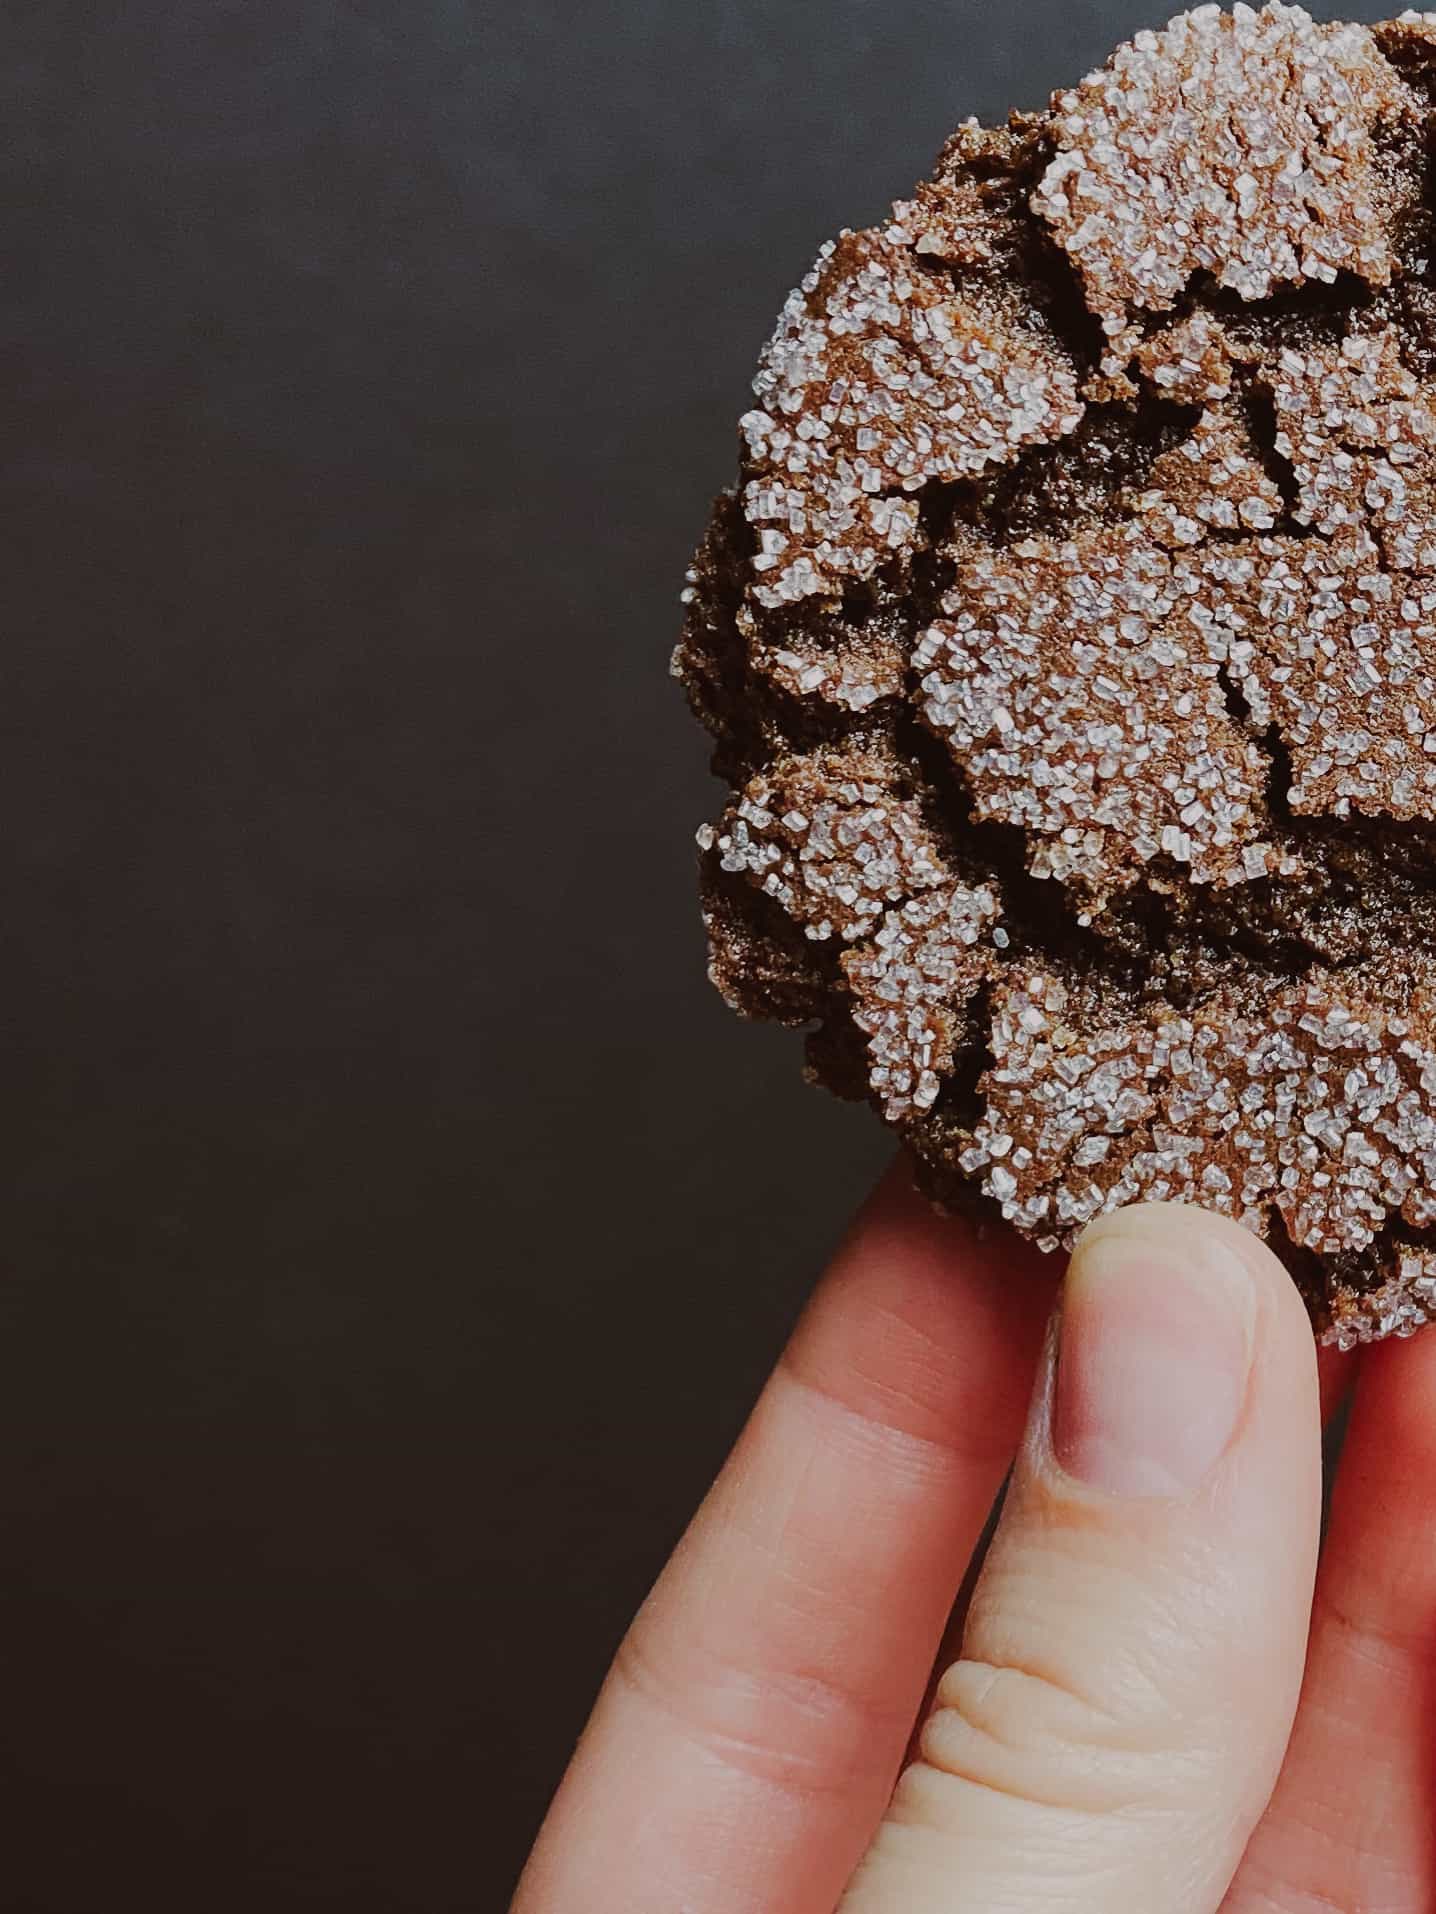 Crackled topped espresso cookie being held with one hand.